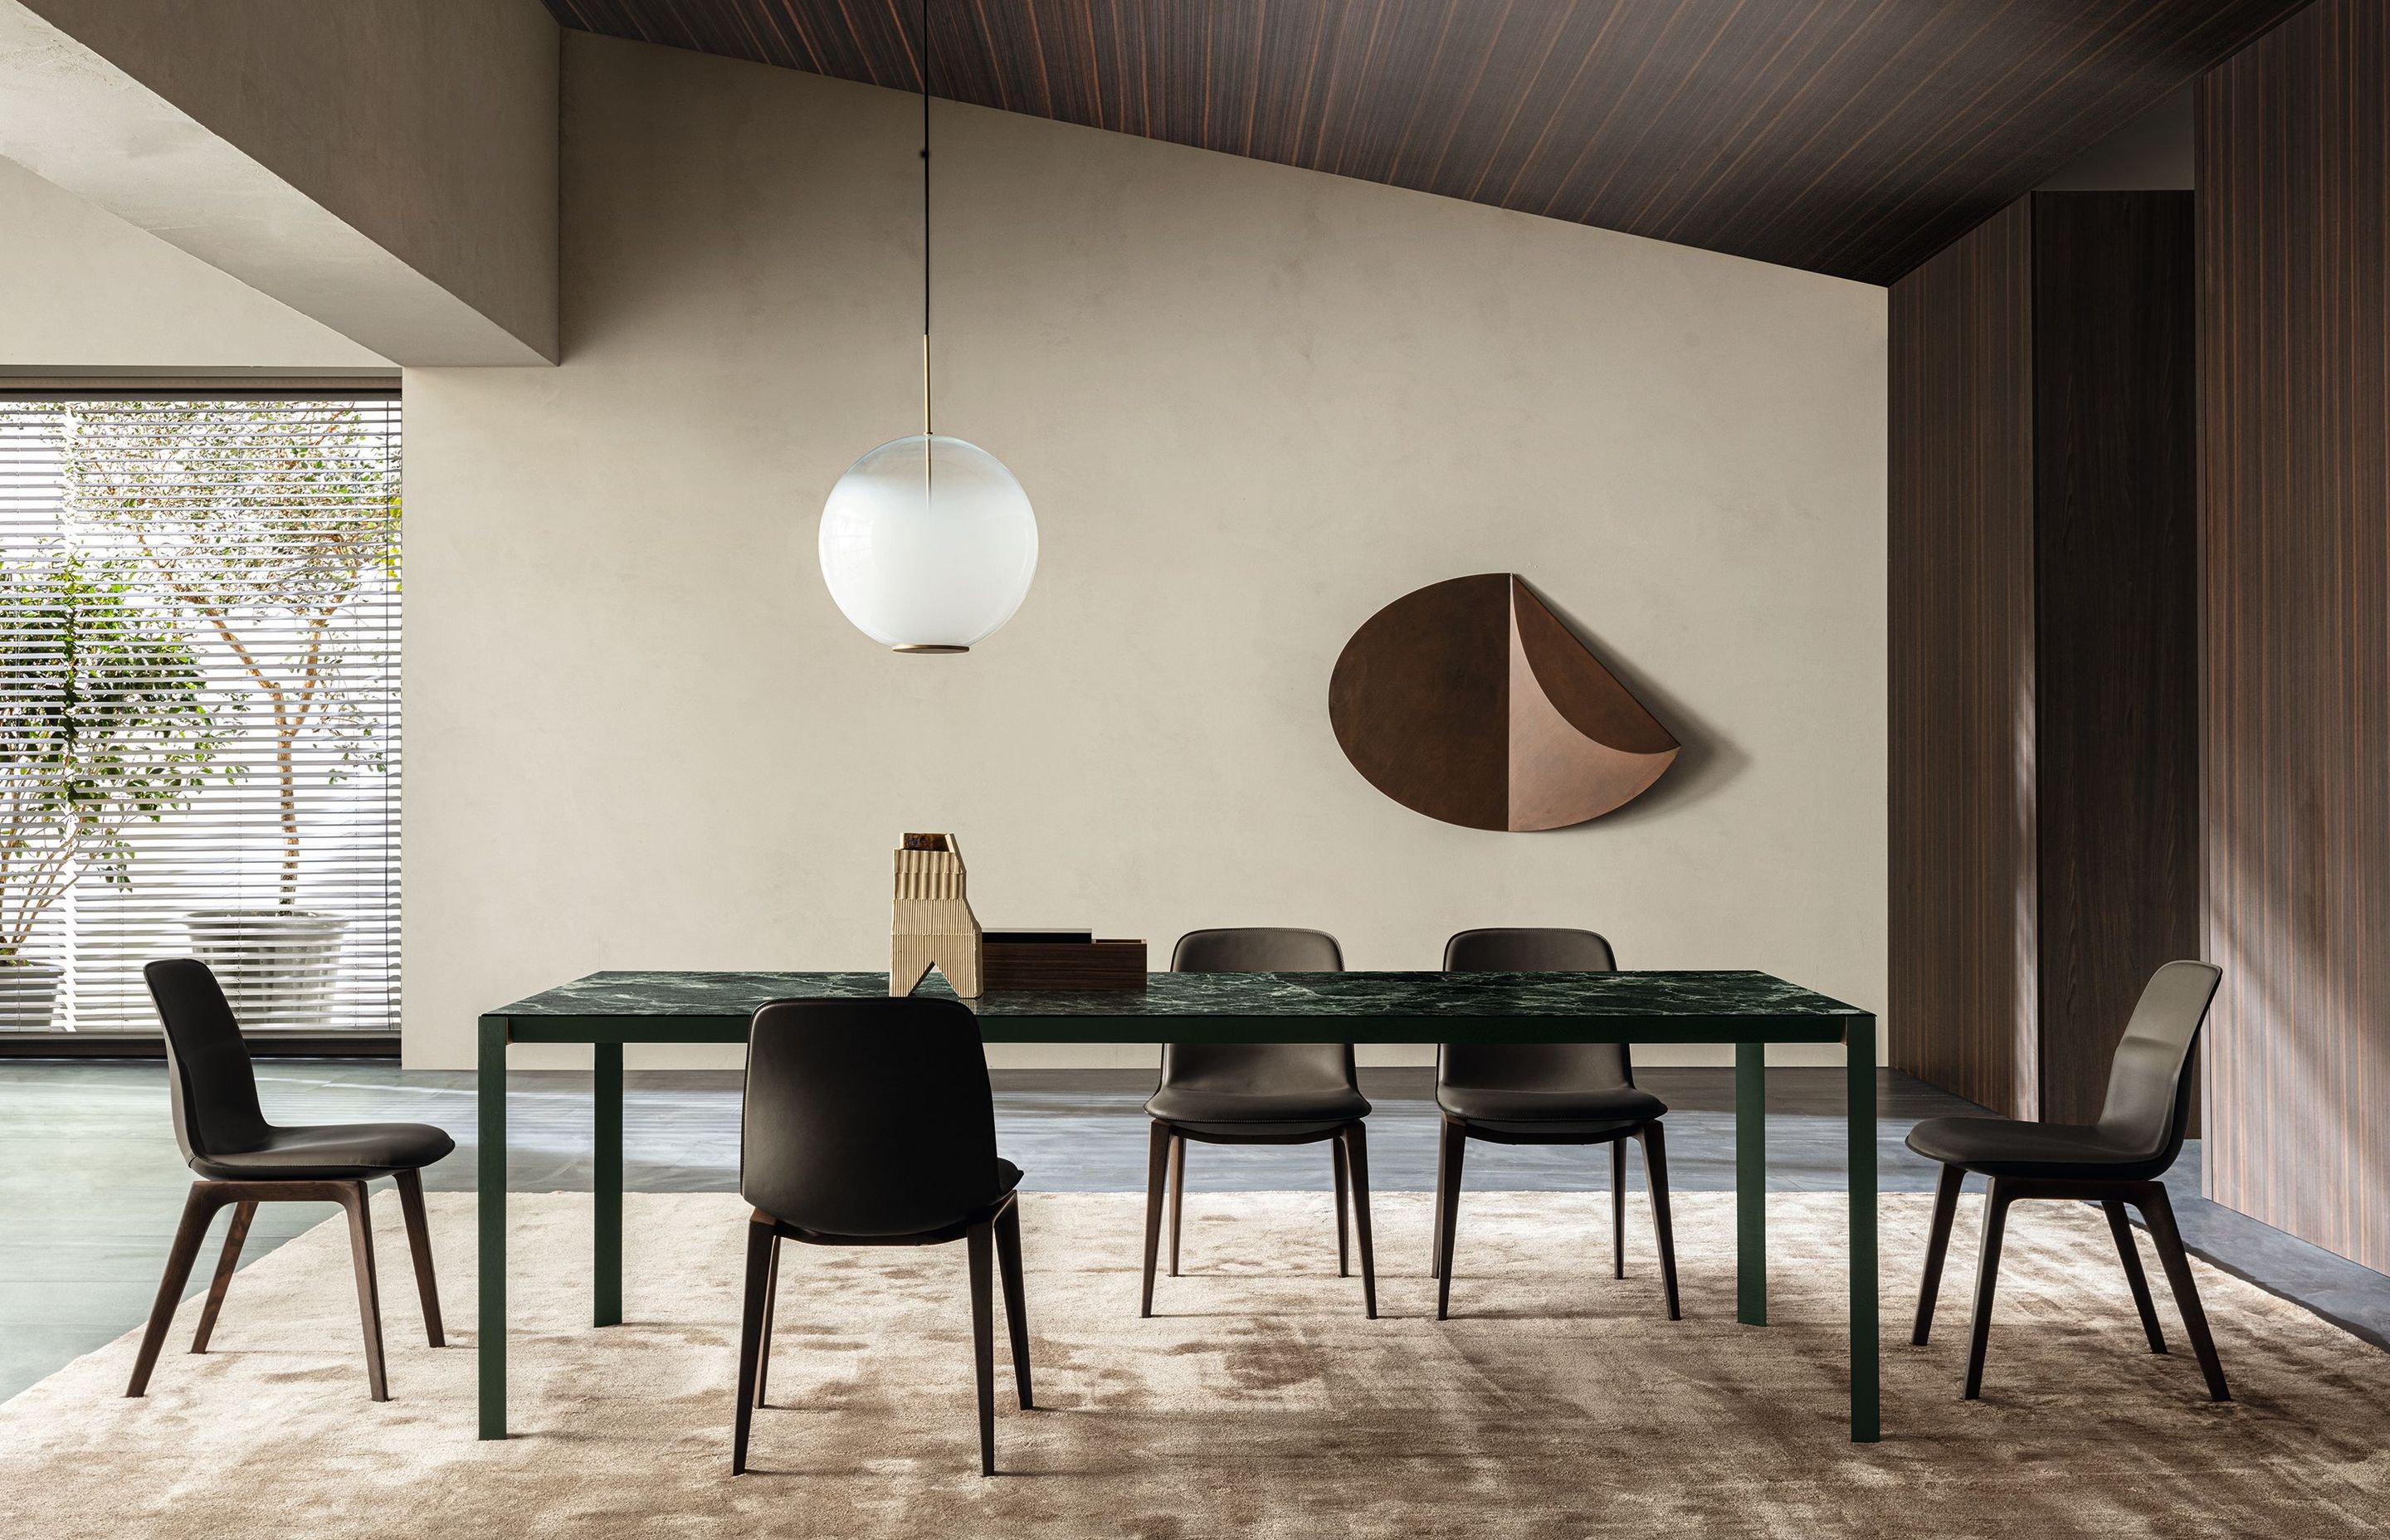 Part of a collection of square and rectangular tables designed by Michael Anastassiades, the Half A Square table is minimalist in design but rich in the combination of materials.